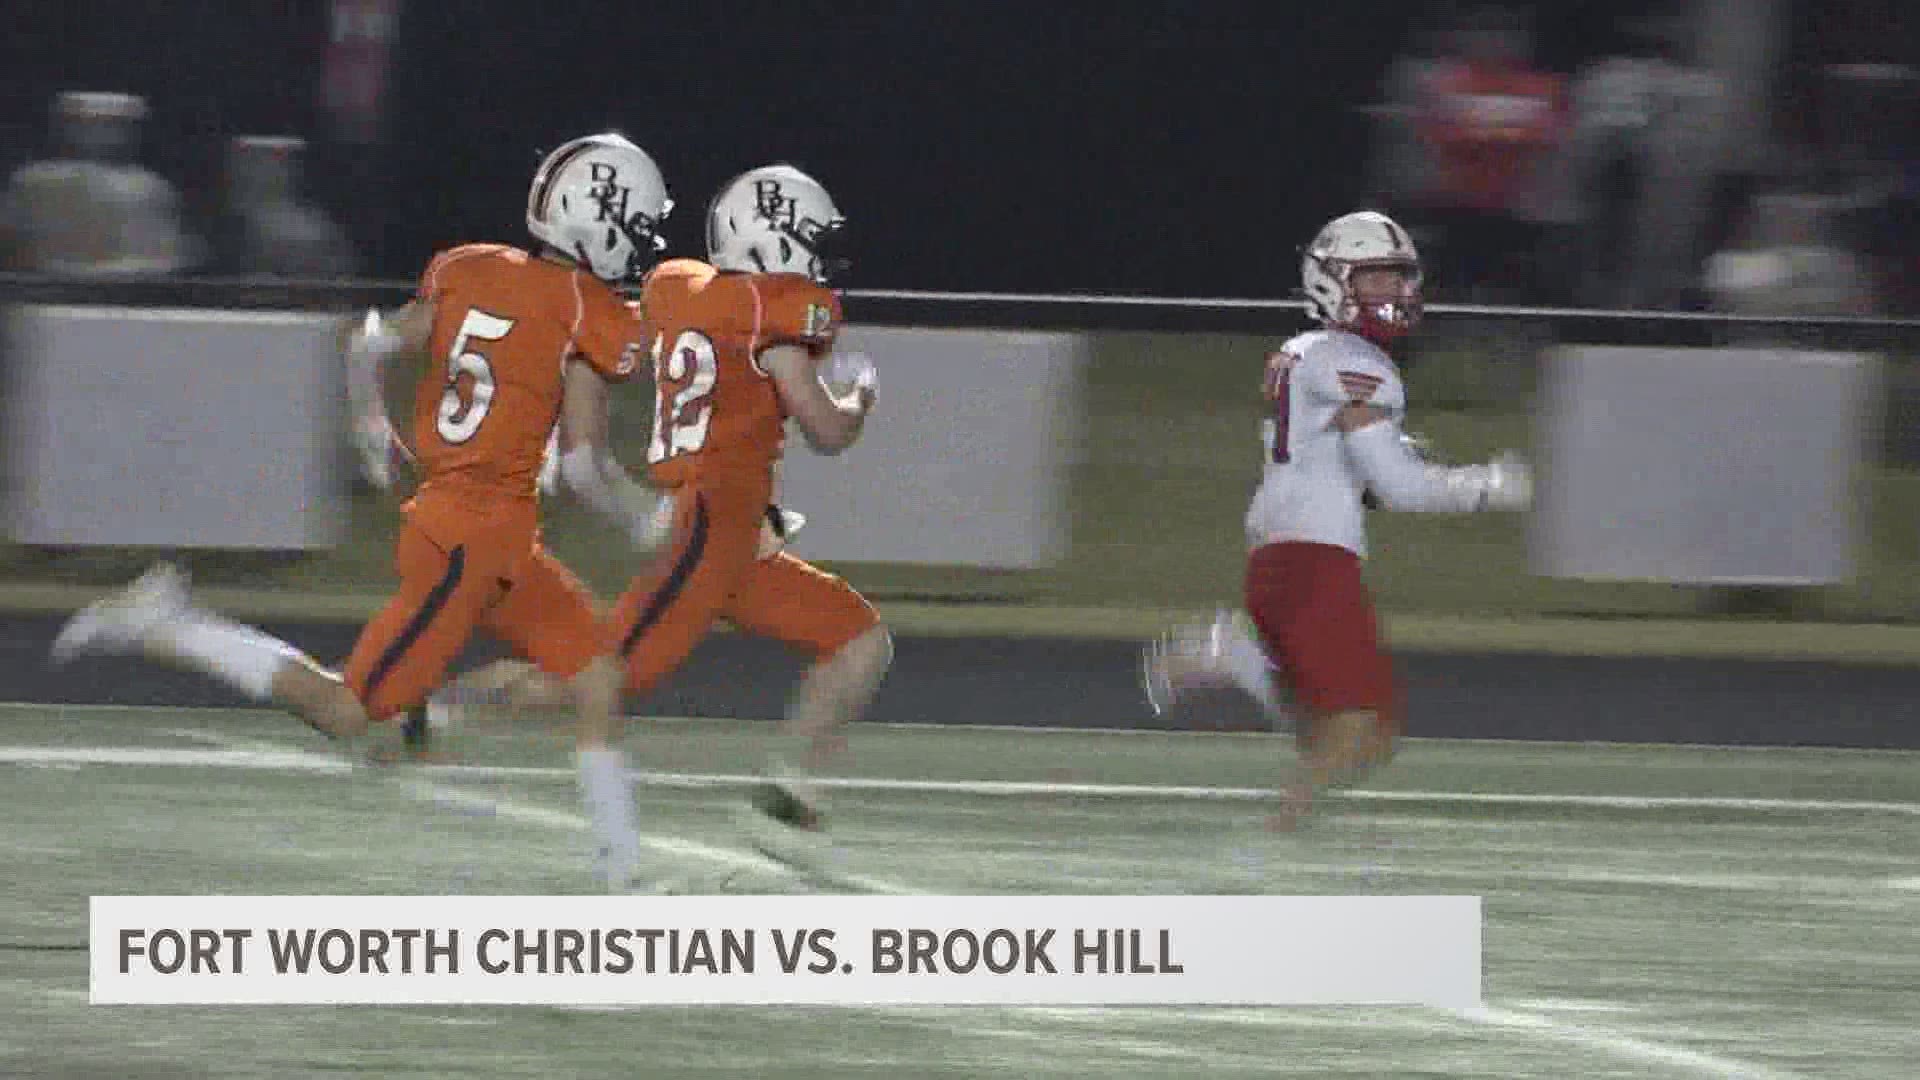 Brook Hill beat Fort Worth Christian by a score of 37-34.